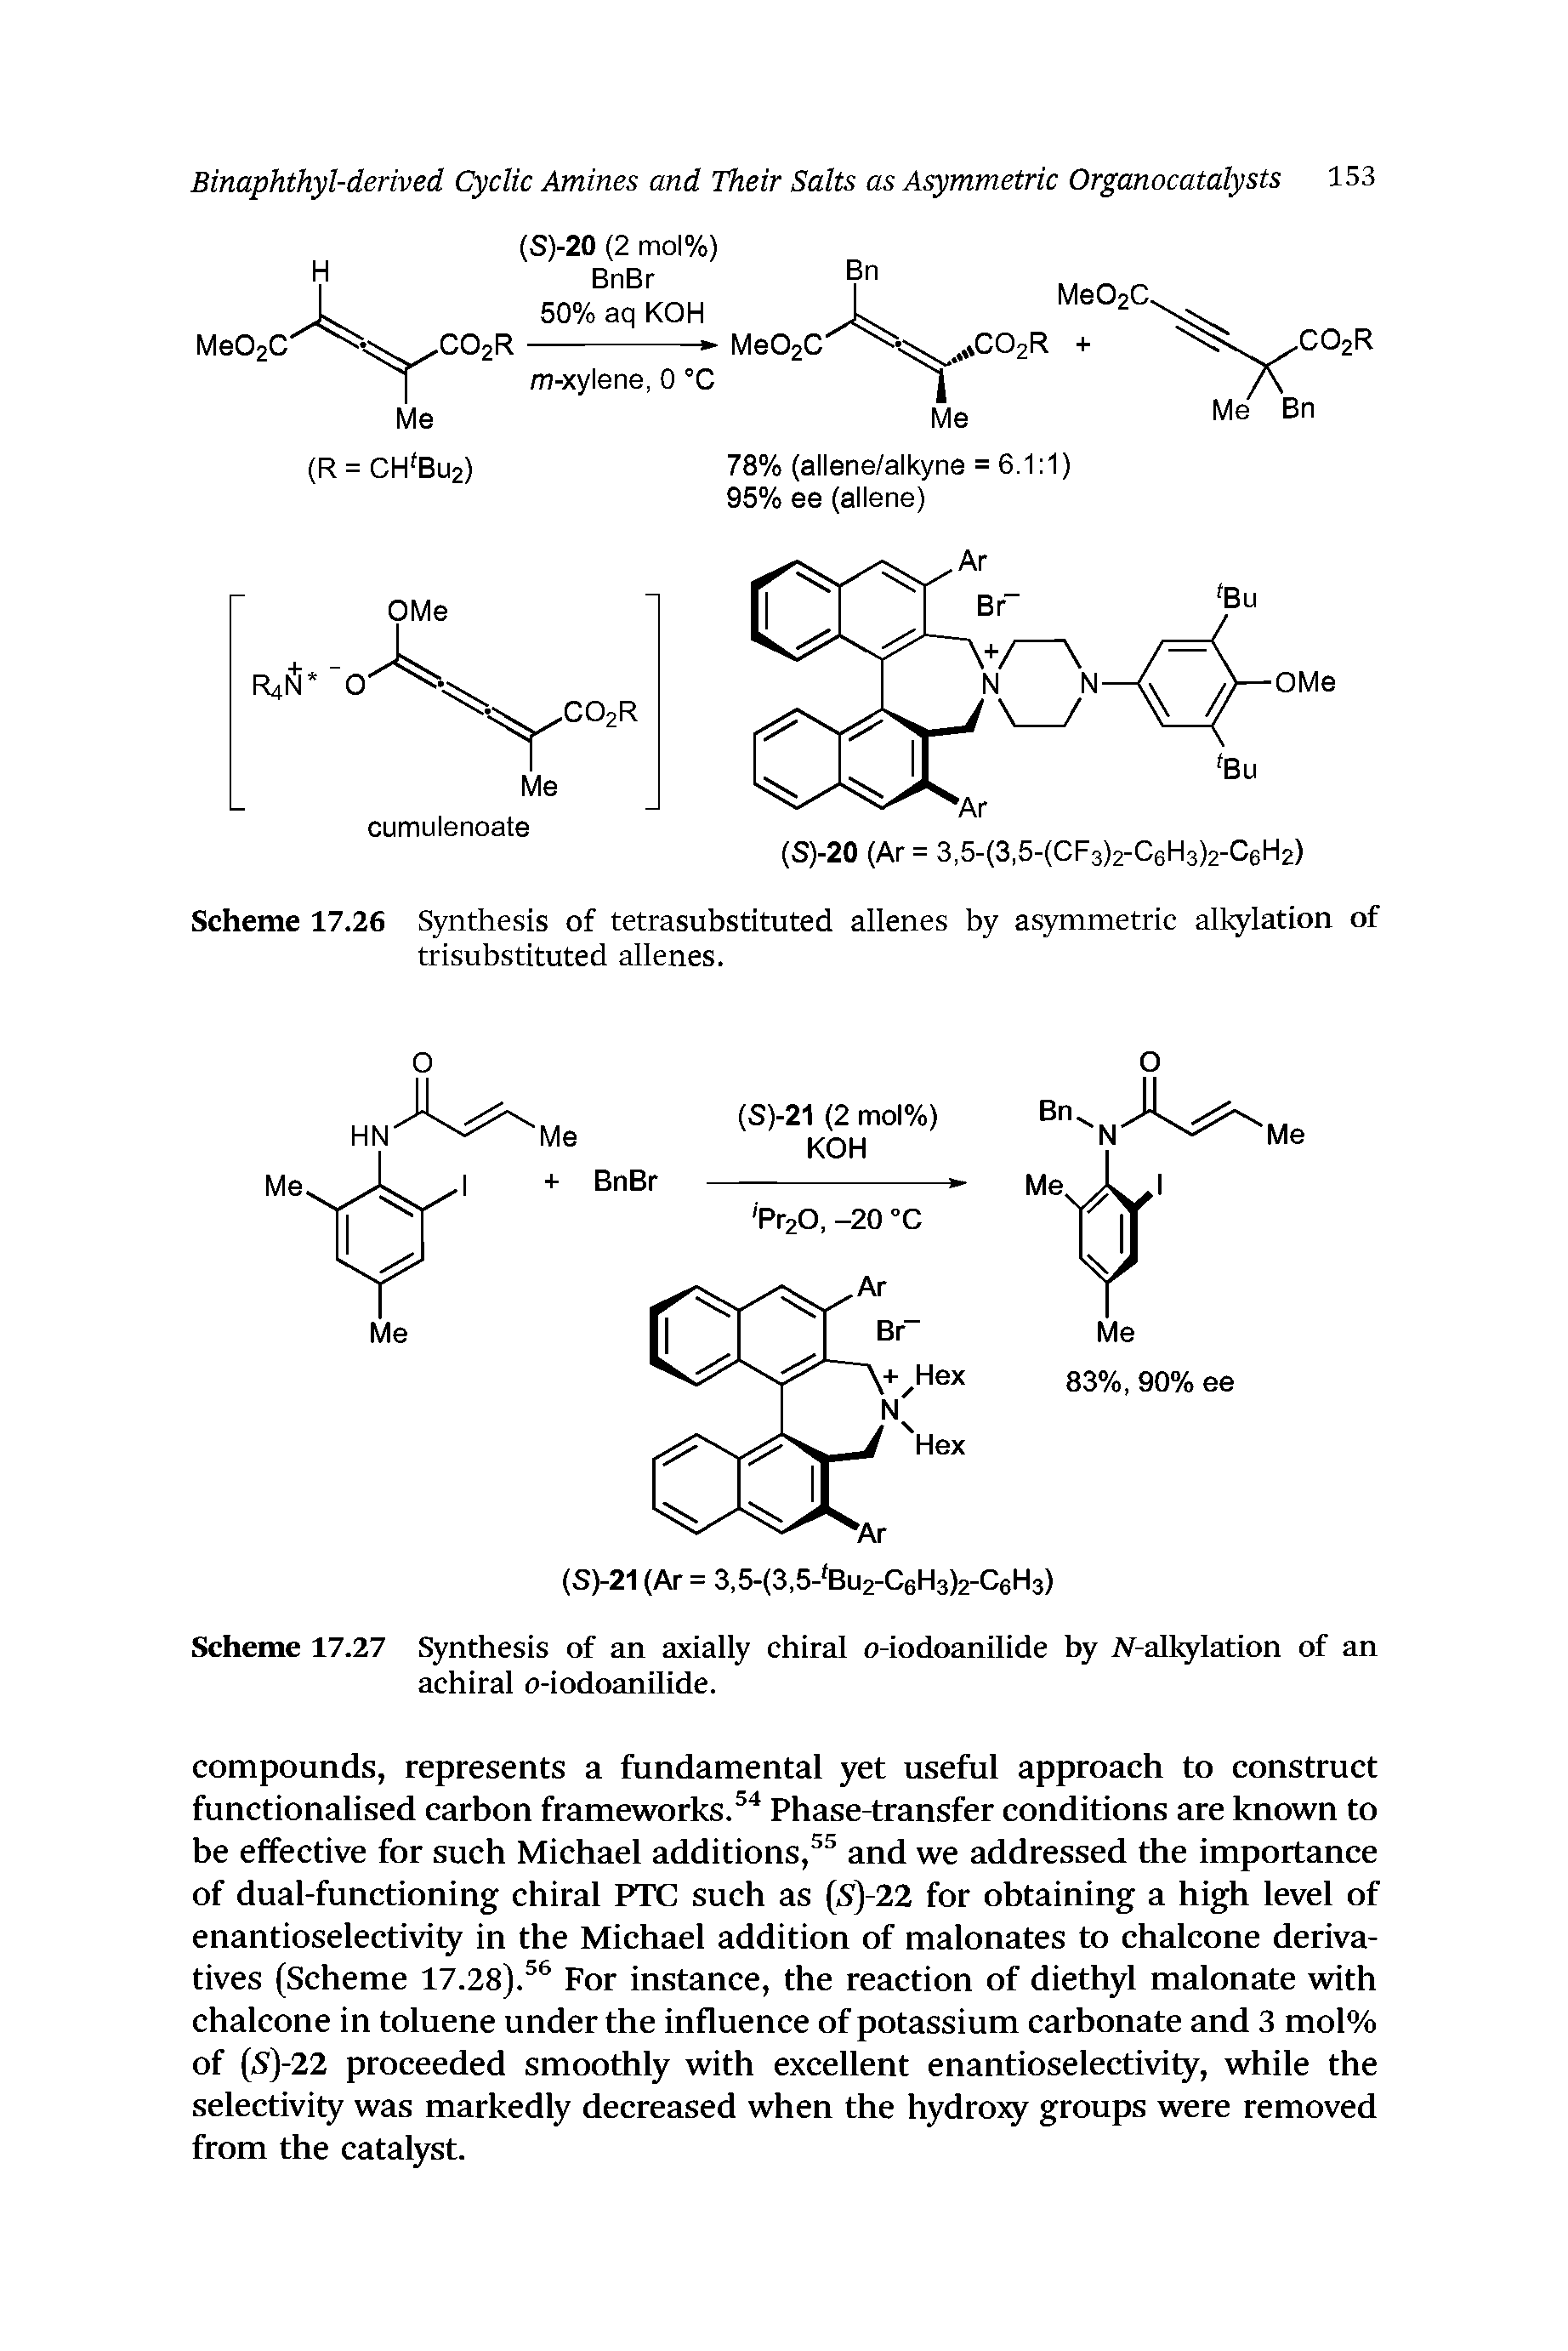 Scheme 17.26 Synthesis of tetrasubstituted allenes by asymmetric alkylation of...